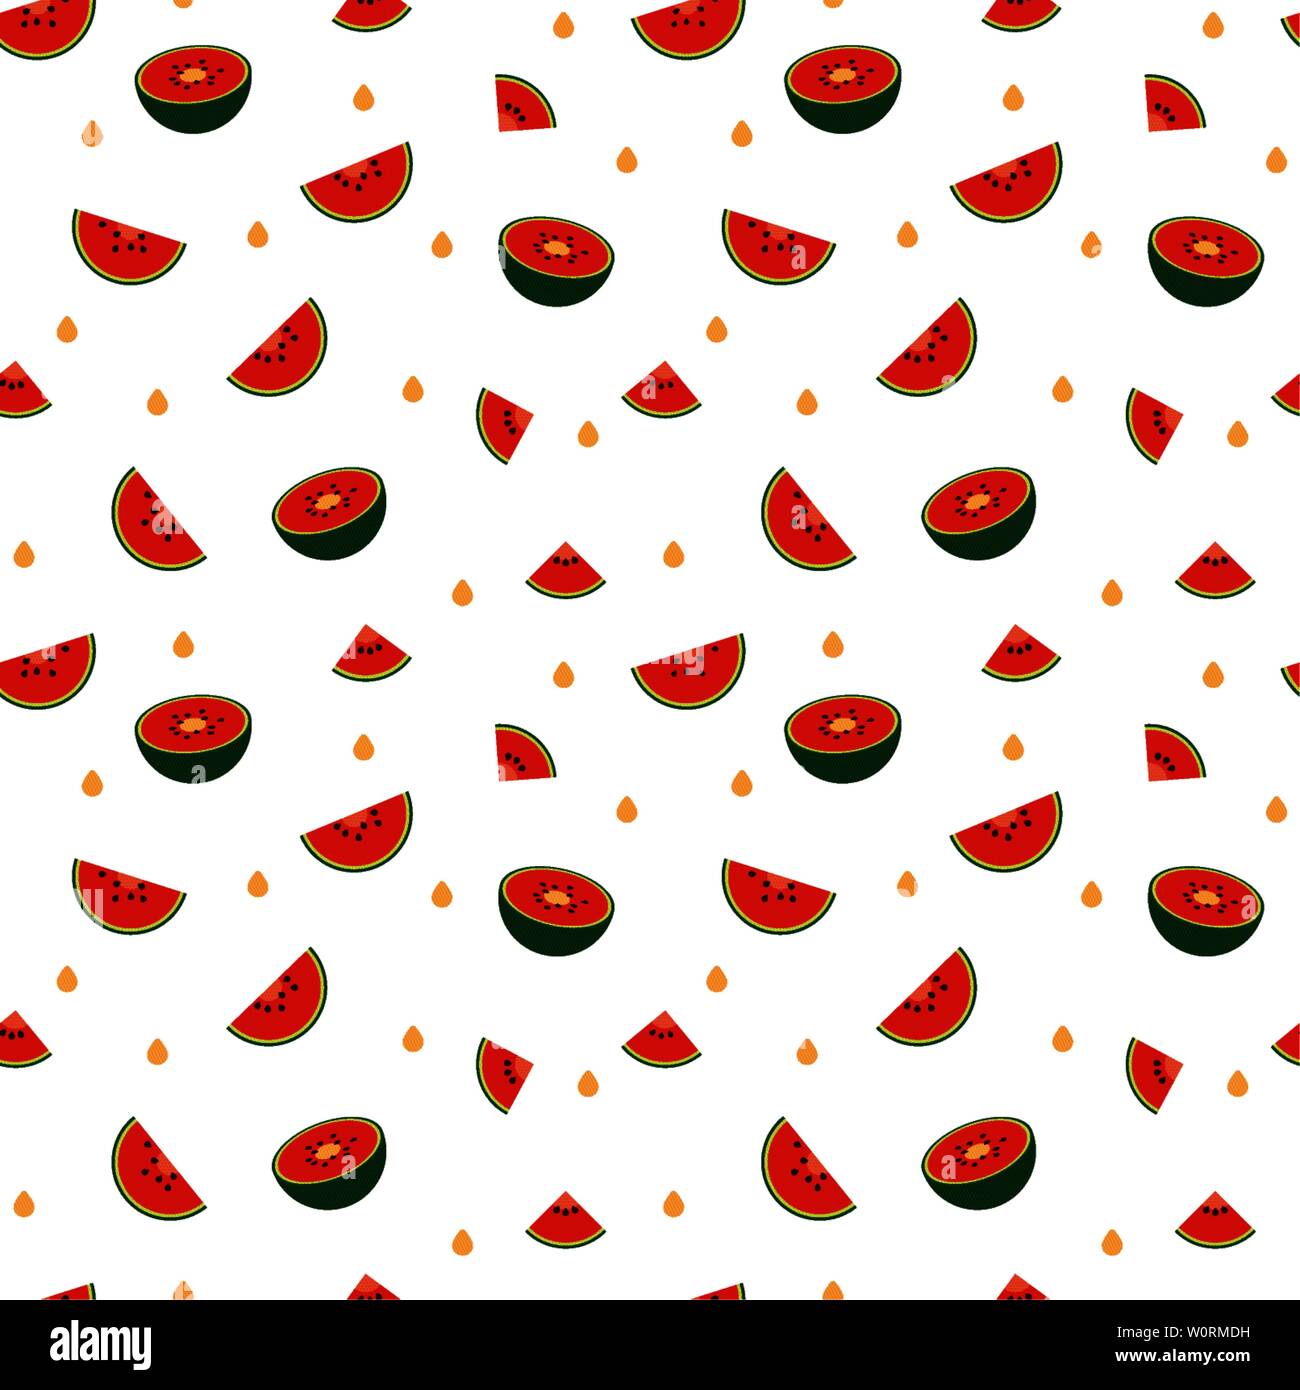 Melon and watermelon Stock Vector Images - Alamy